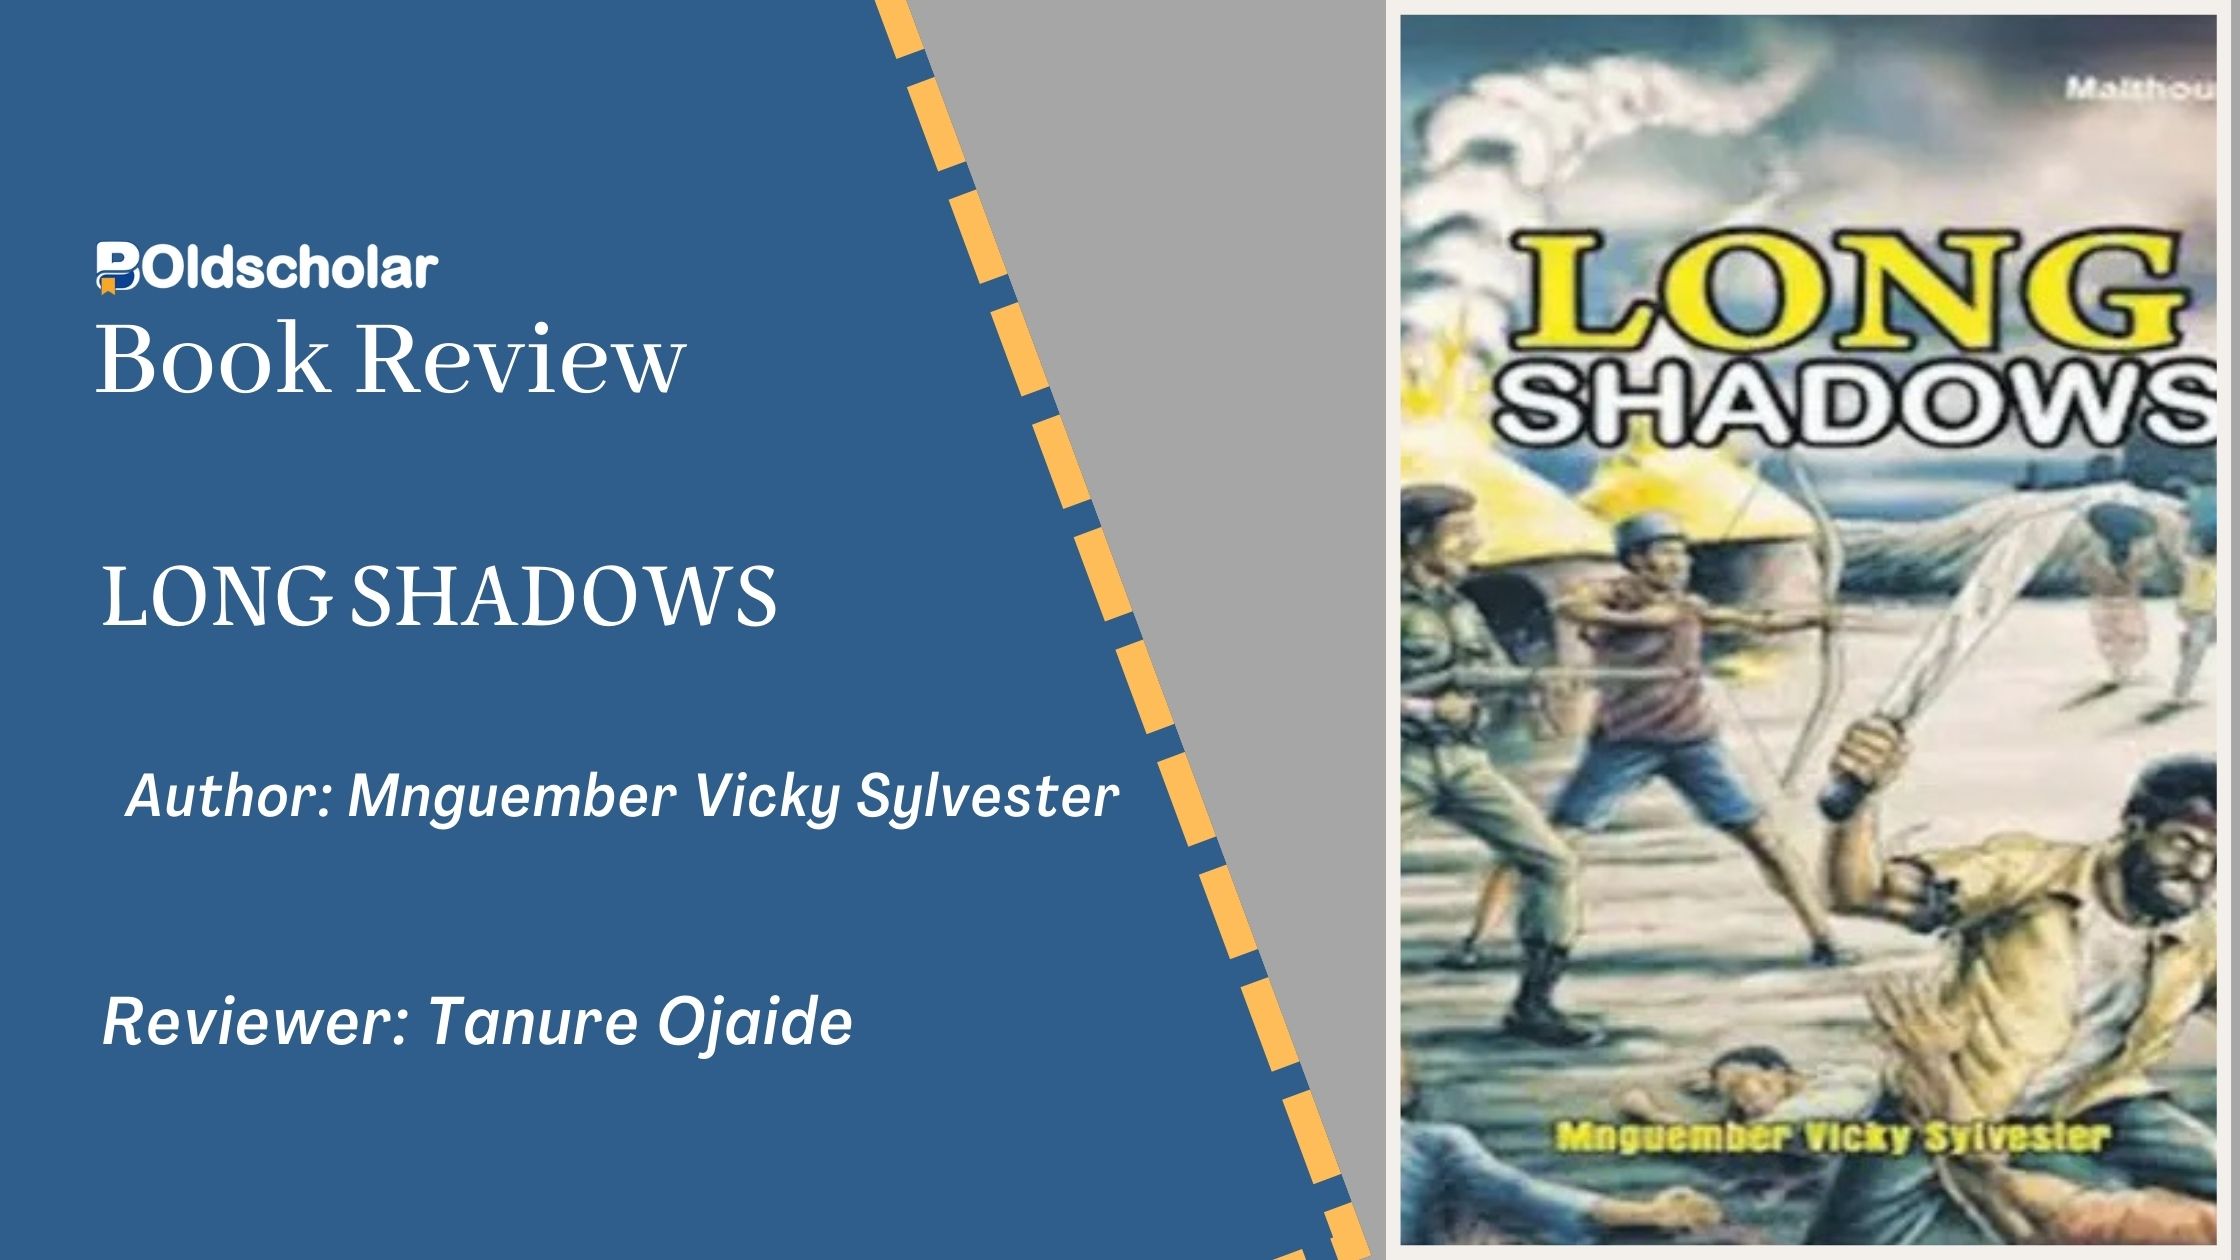 A Review of Vicky Sylvester’s Long Shadows, by Tanure Ojaide